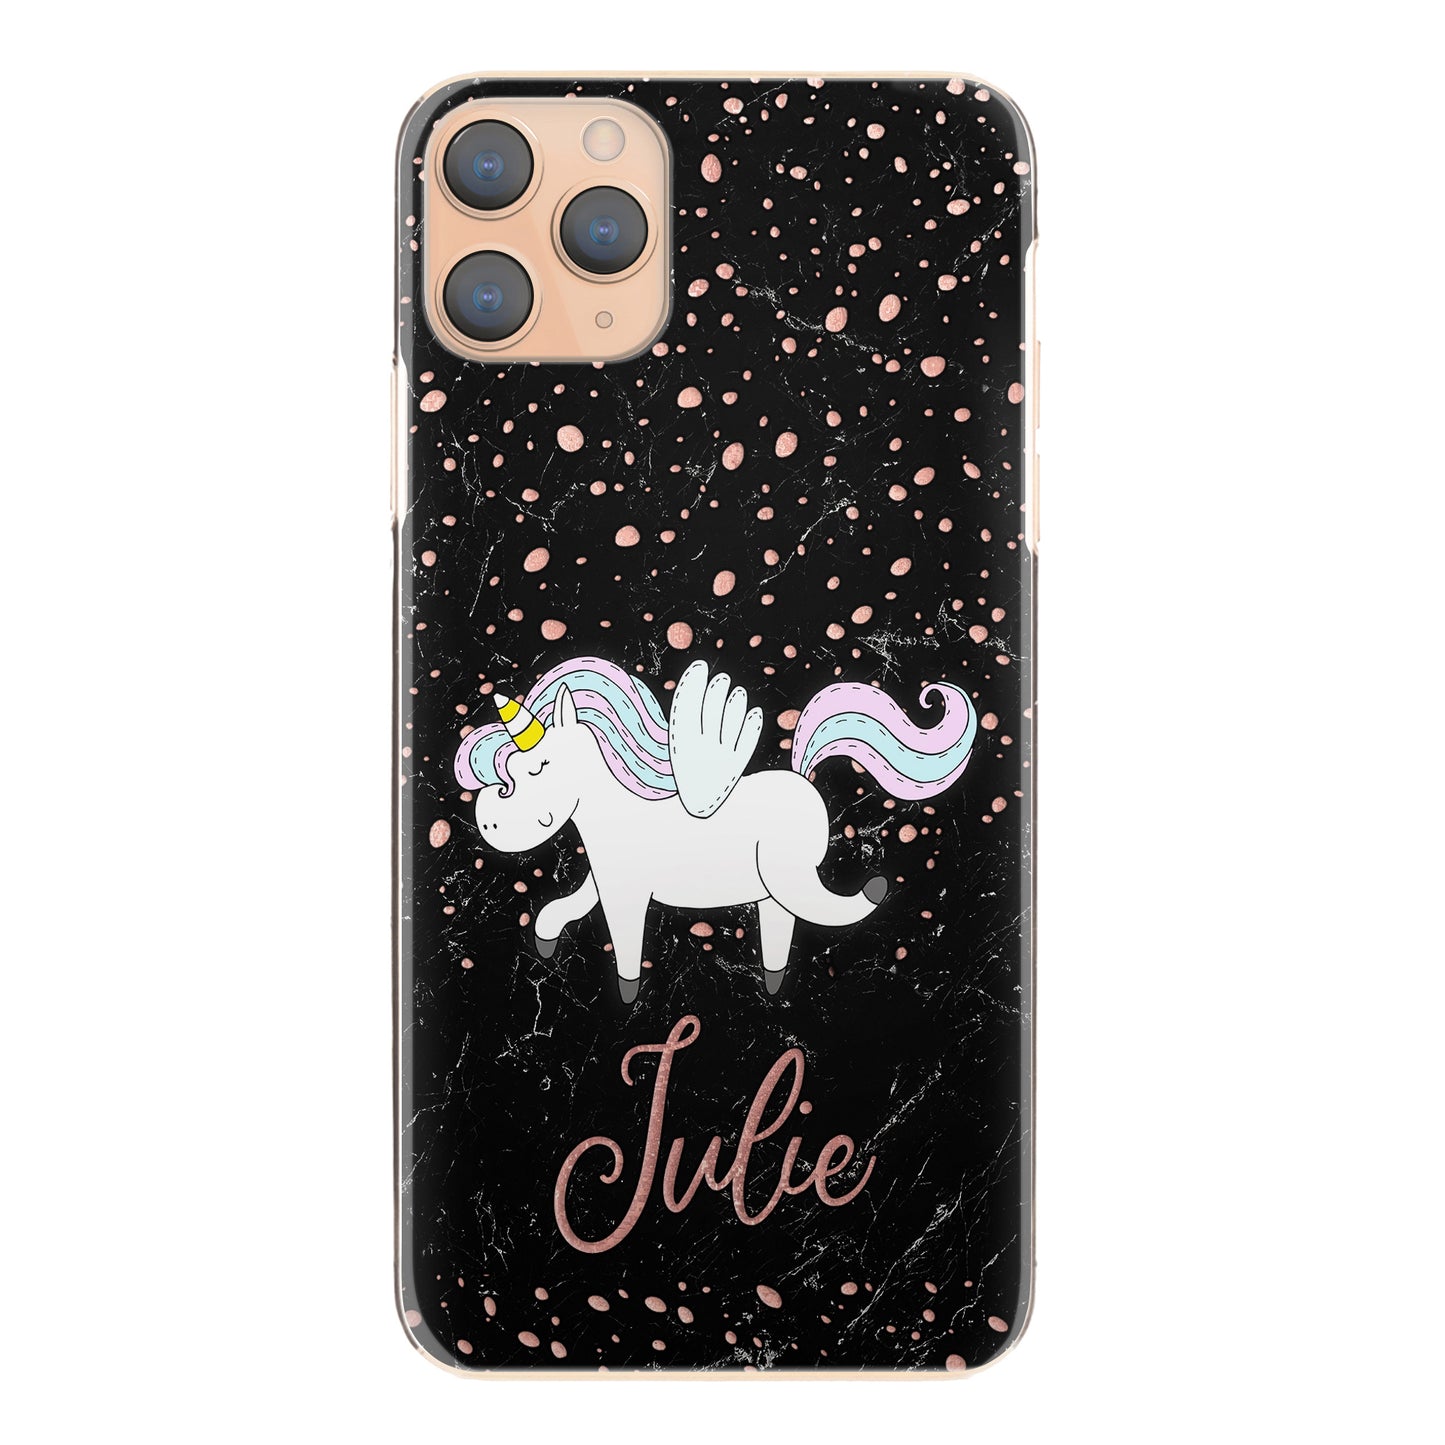 Personalised Apple iPhone Hard Case with Winged Unicorn and Pink Text on Black Marble